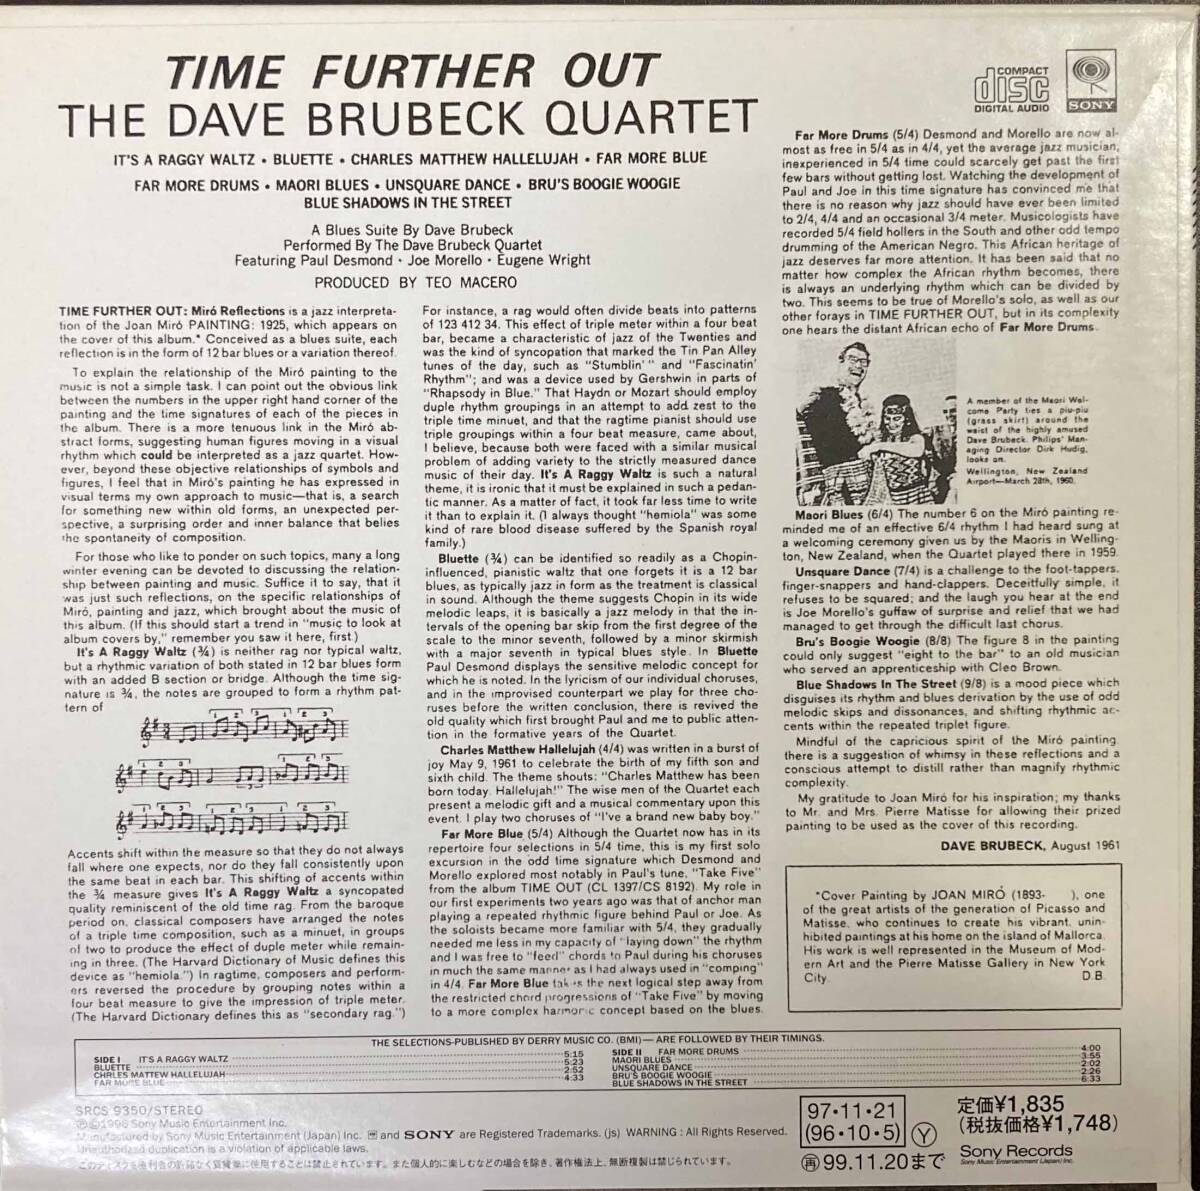 Dave Brubeck Quartet / Time Further Out 中古CD 国内盤 帯付き 紙ジャケ リマスタリング 初回限定盤 日本初CD化の画像2